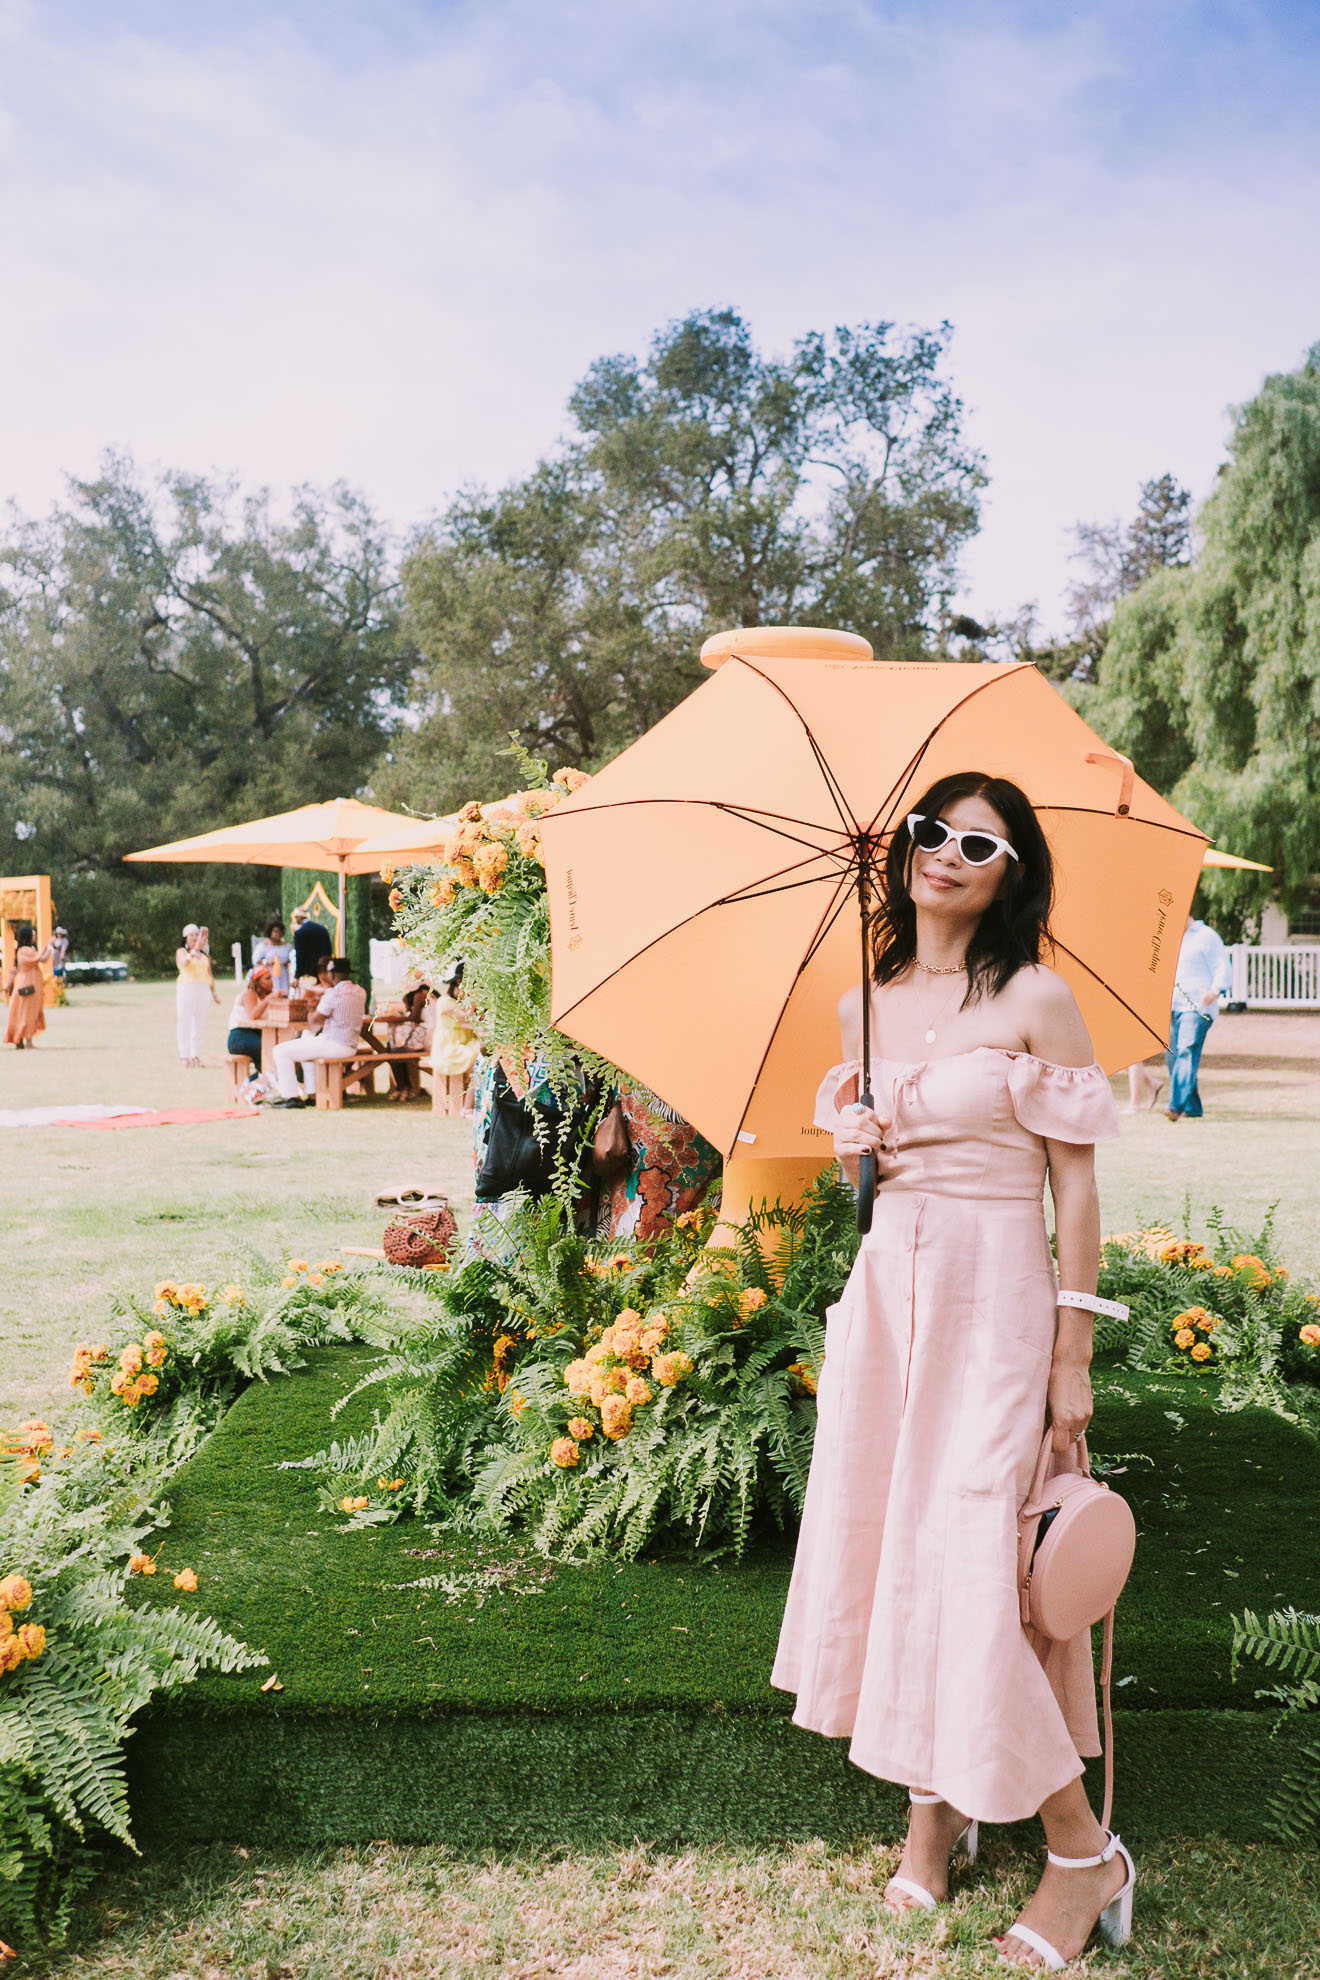 How To Enjoy The Veuve Clicquot Polo Classic Like A VIP